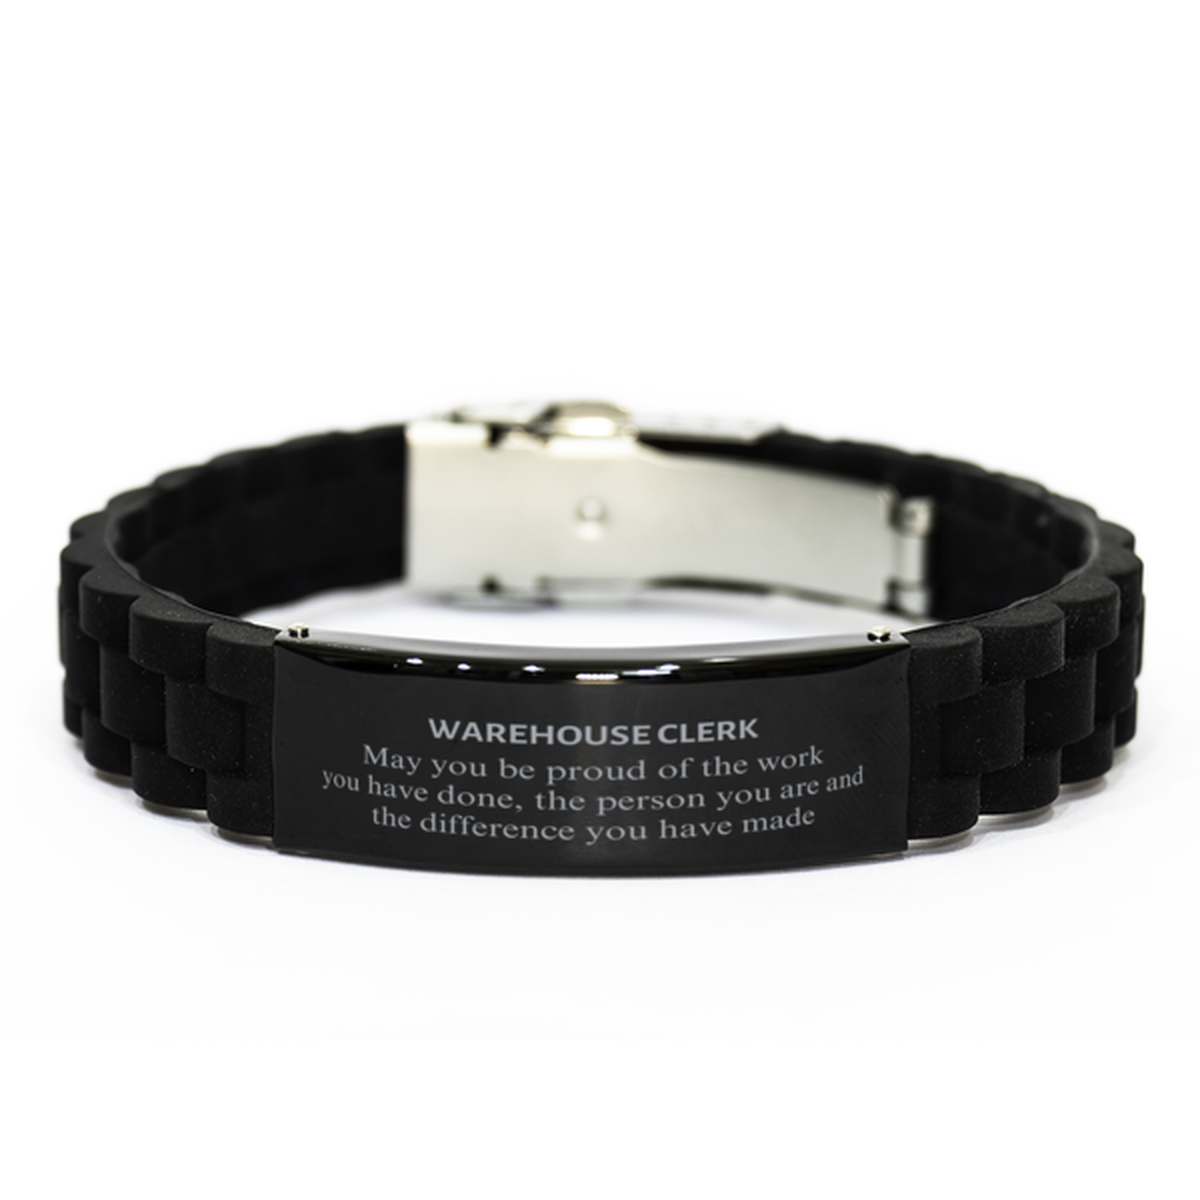 Warehouse Clerk May you be proud of the work you have done, Retirement Warehouse Clerk Black Glidelock Clasp Bracelet for Colleague Appreciation Gifts Amazing for Warehouse Clerk